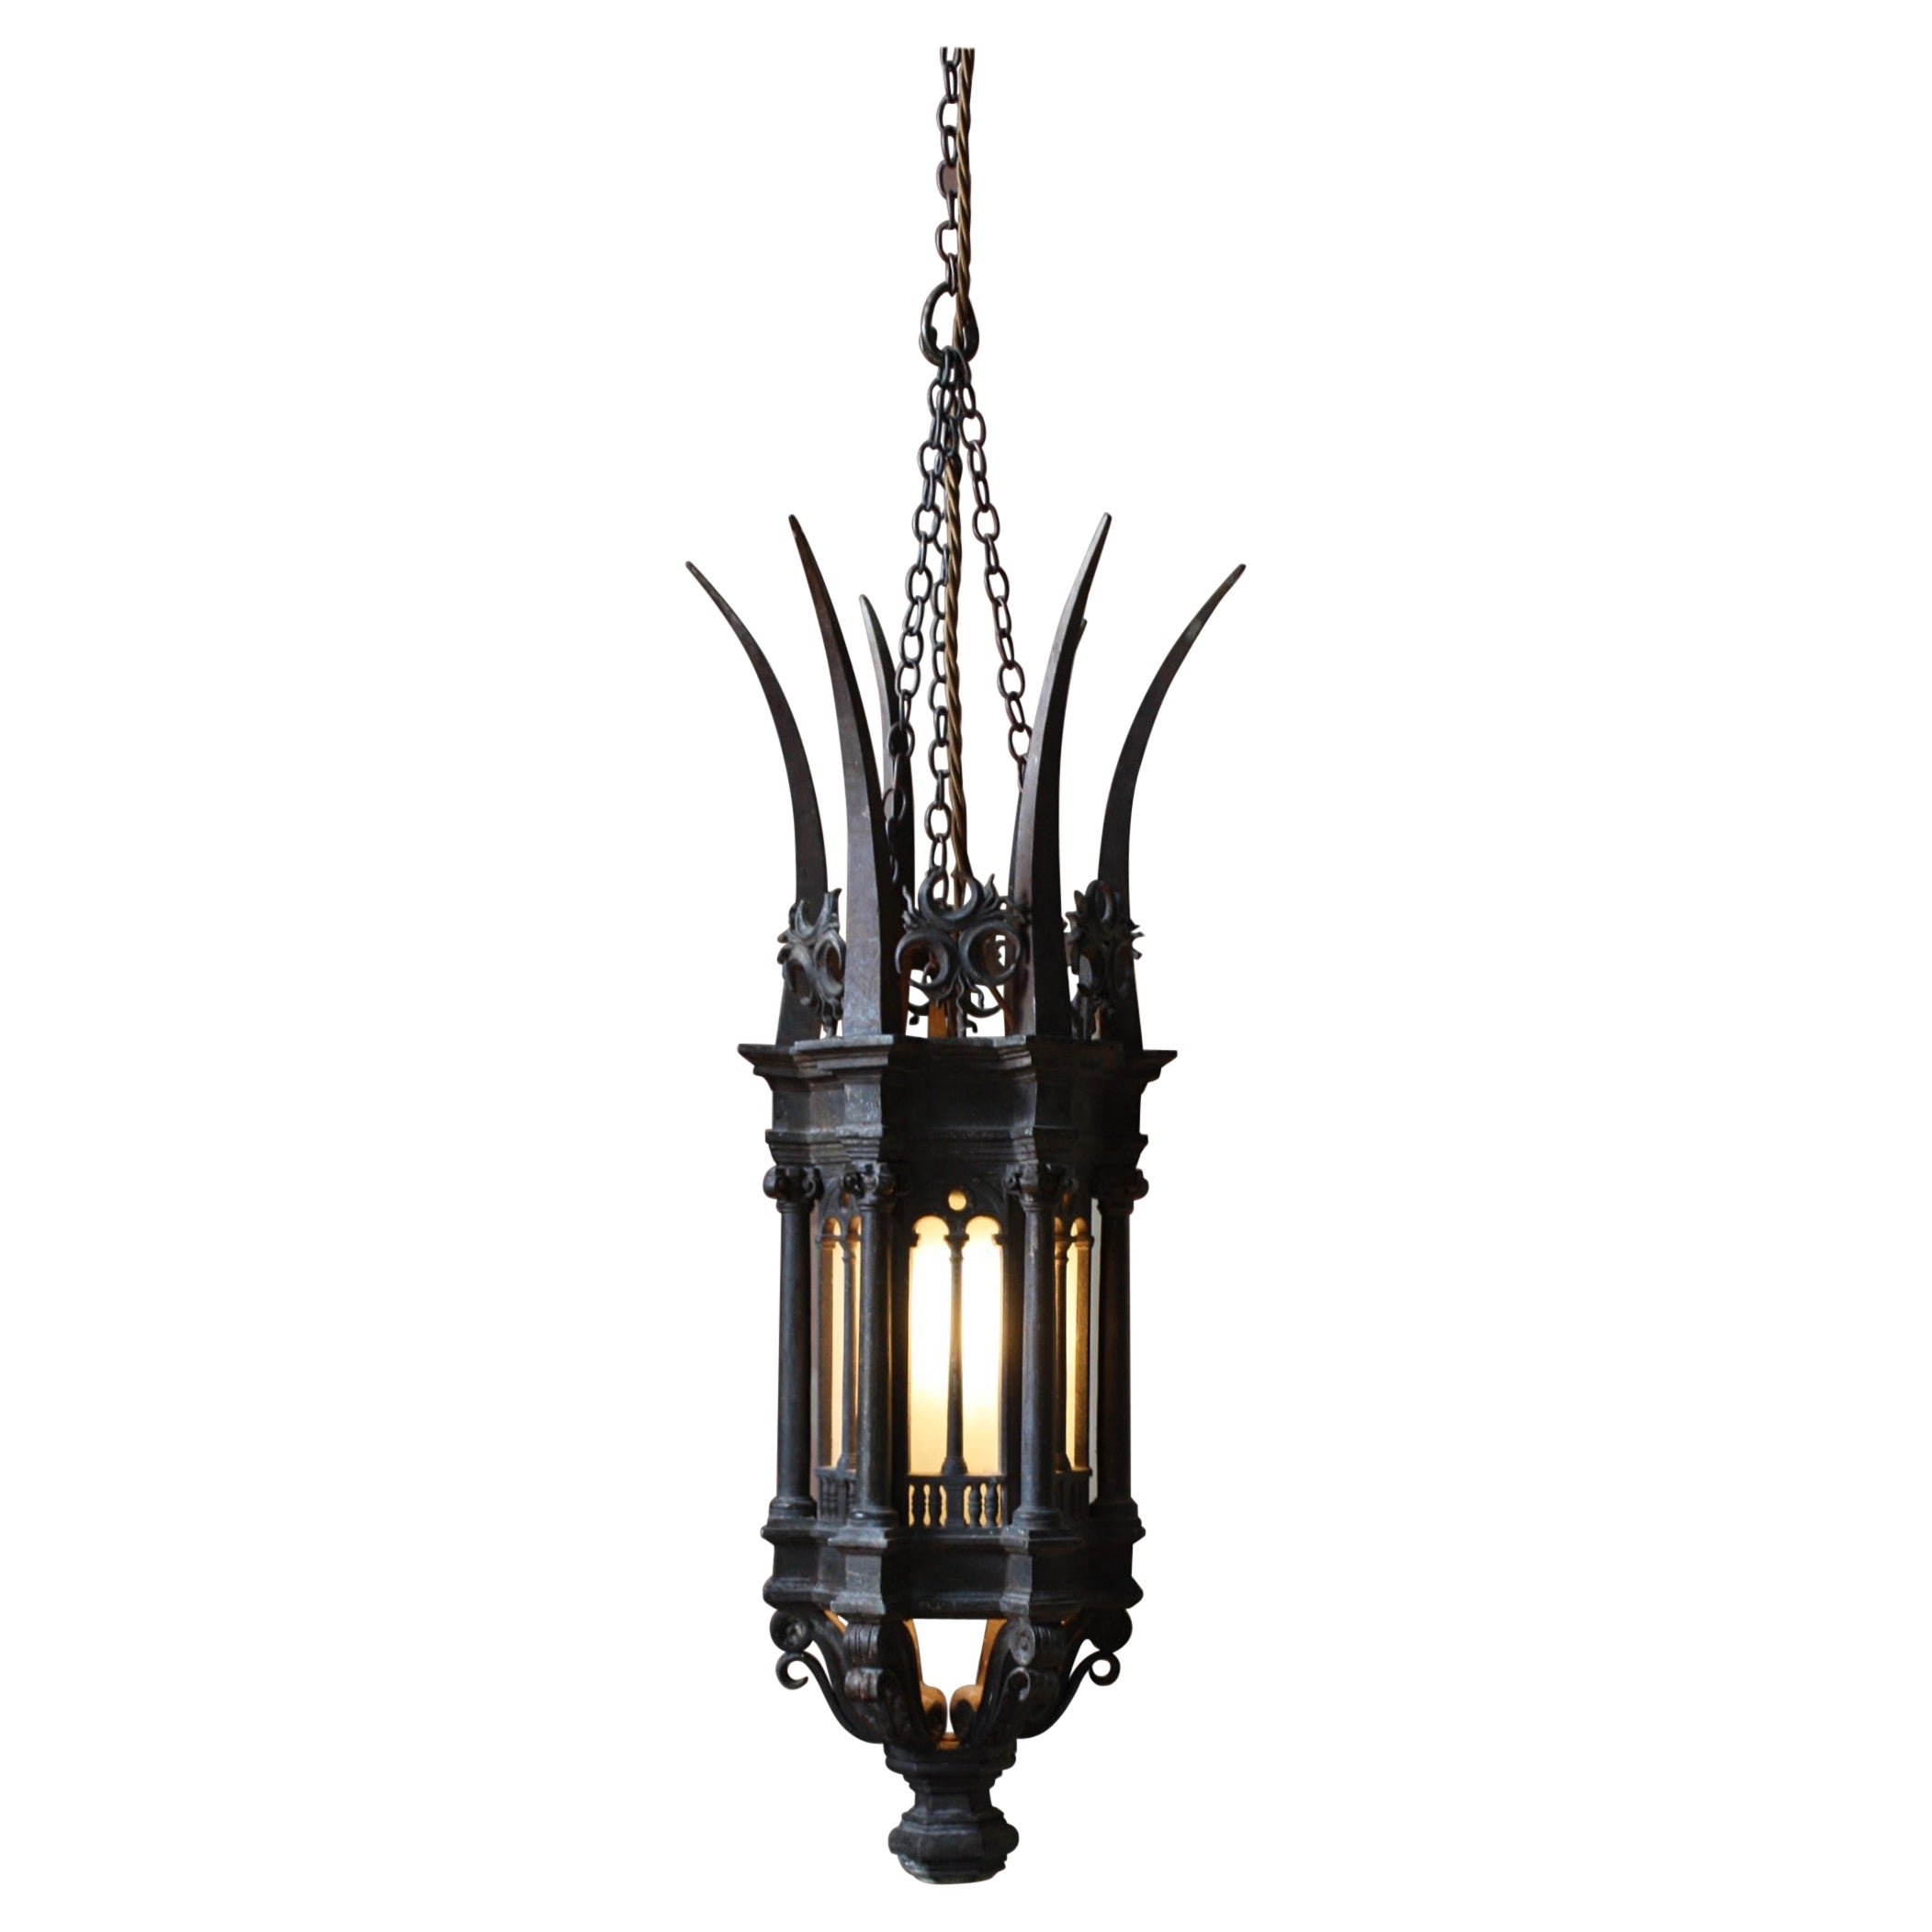 Early 20th Century Gothic Revival Architectural Cast Iron Hall Lantern Light